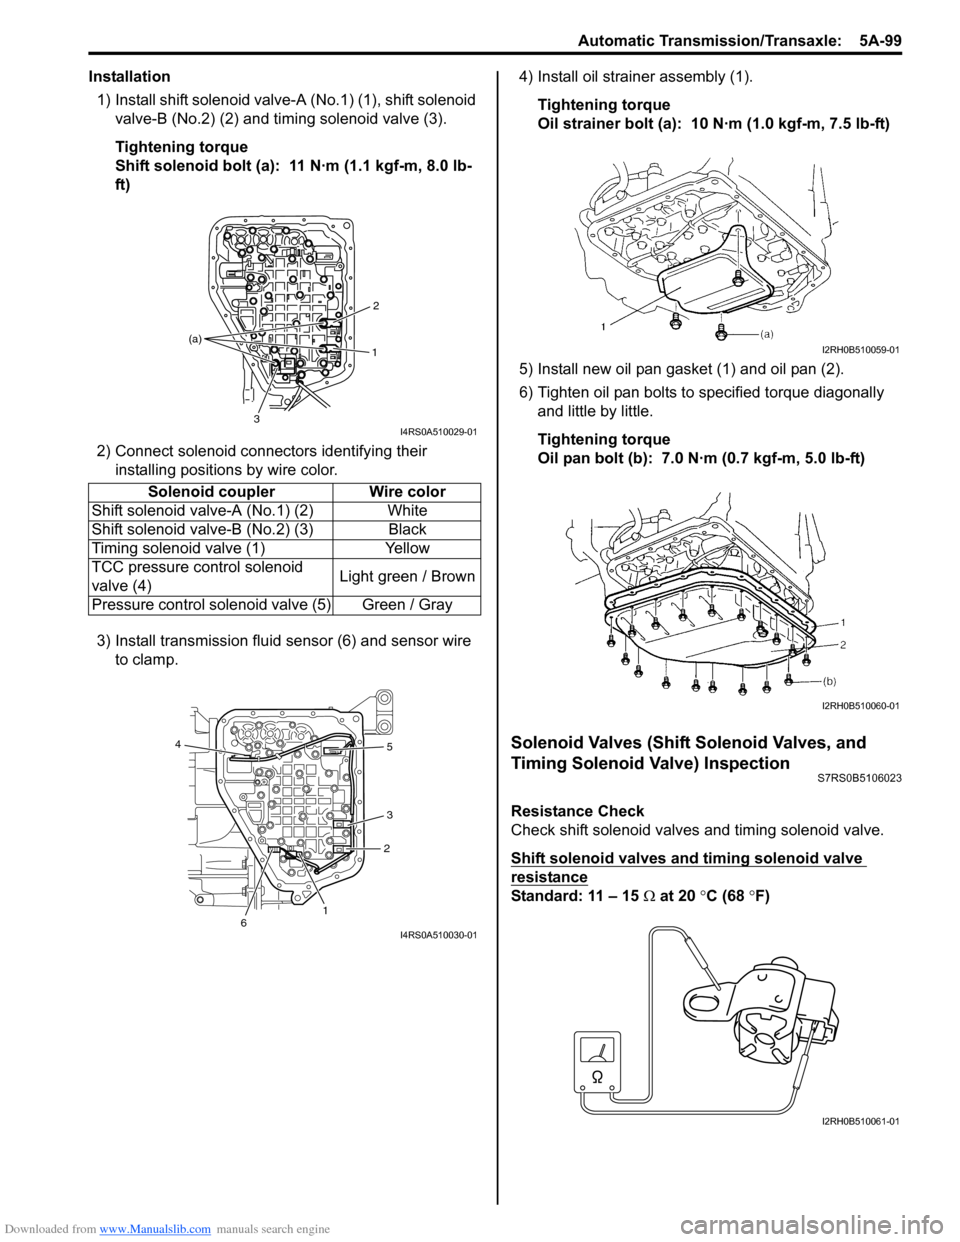 SUZUKI SWIFT 2008 2.G Service Workshop Manual Downloaded from www.Manualslib.com manuals search engine Automatic Transmission/Transaxle:  5A-99
Installation1) Install shift solenoid valve- A (No.1) (1), shift solenoid 
valve-B (No.2) (2) and timi